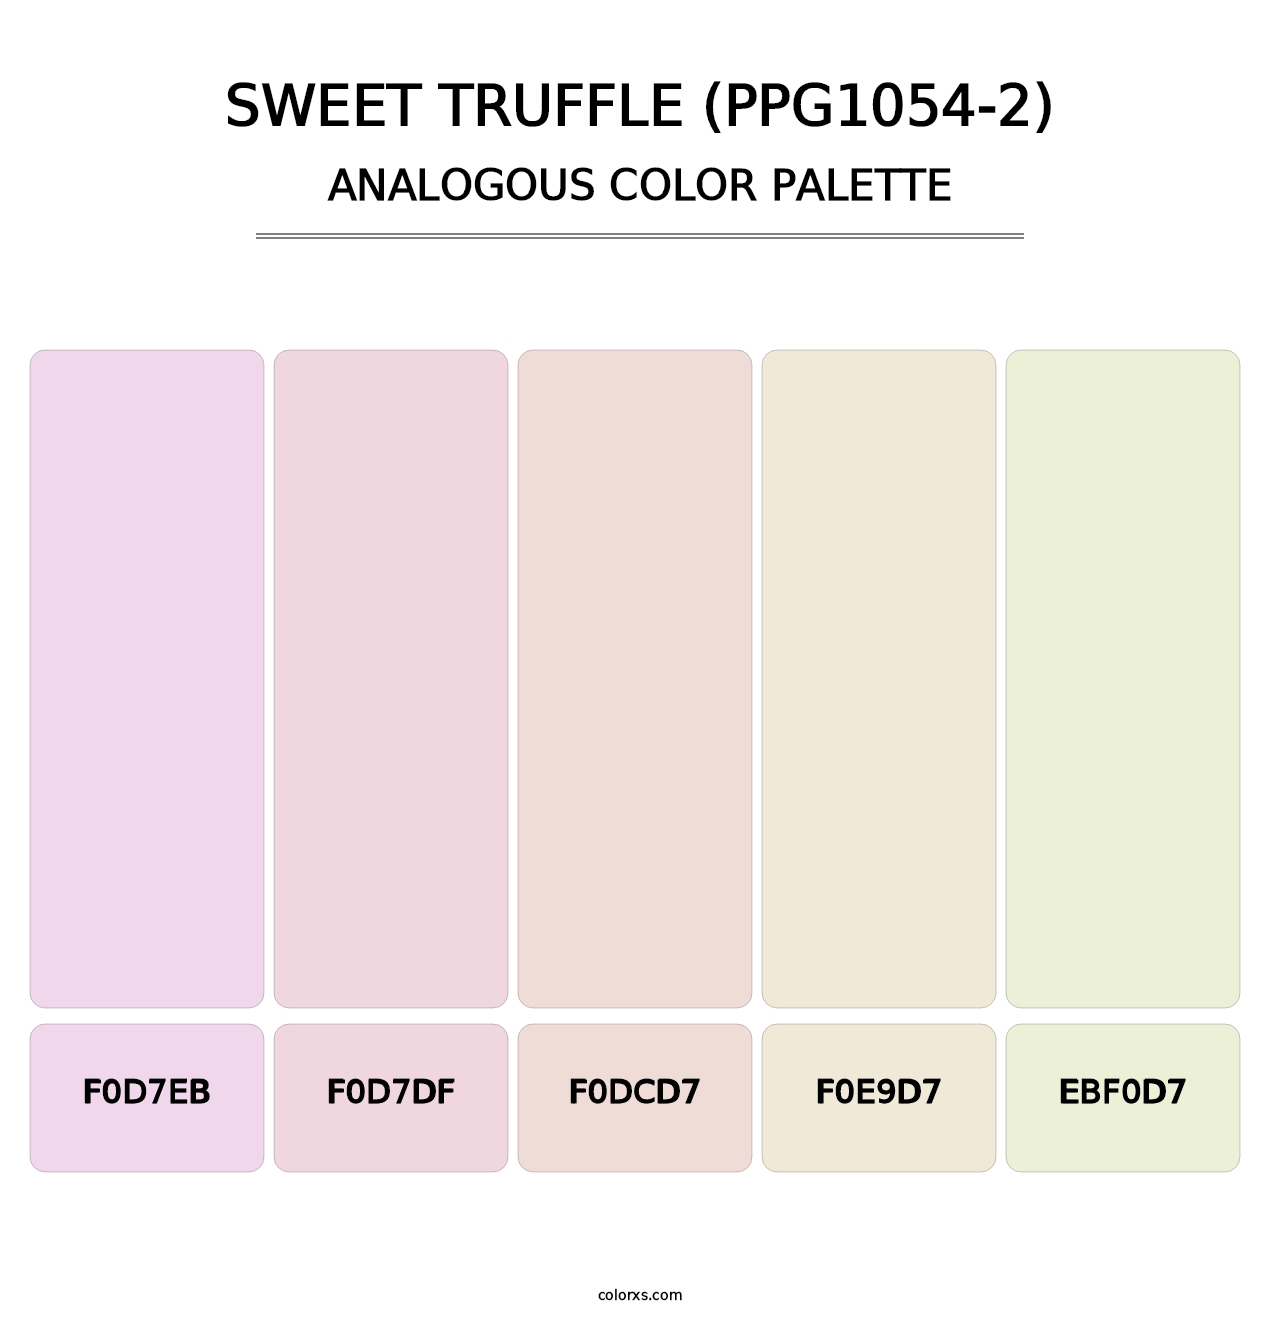 Sweet Truffle (PPG1054-2) - Analogous Color Palette